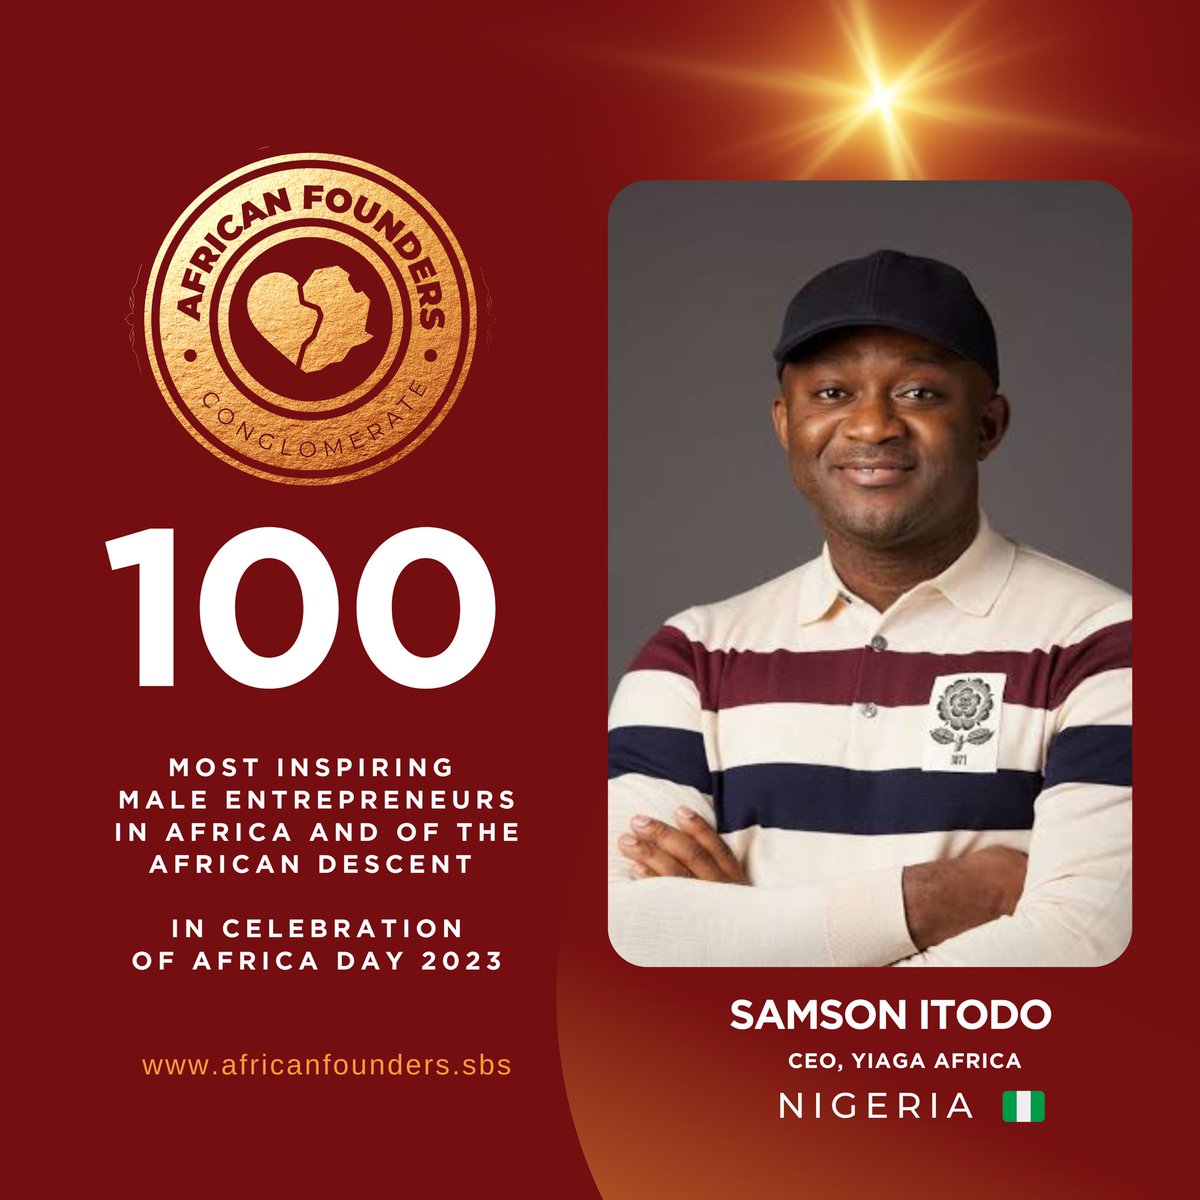 #AFCFeatures | In celebration of AFRICA DAY , we honor #Samsonitodo for his resilience, achievements and great entrepreneurial spirit.

African Founders Feature.
#100mostinspiringmaleentrepreneurs
.
AFRICAN FOUNDERS CONGLOMERATE | Promoting Entrepreneurship & Lifestyle